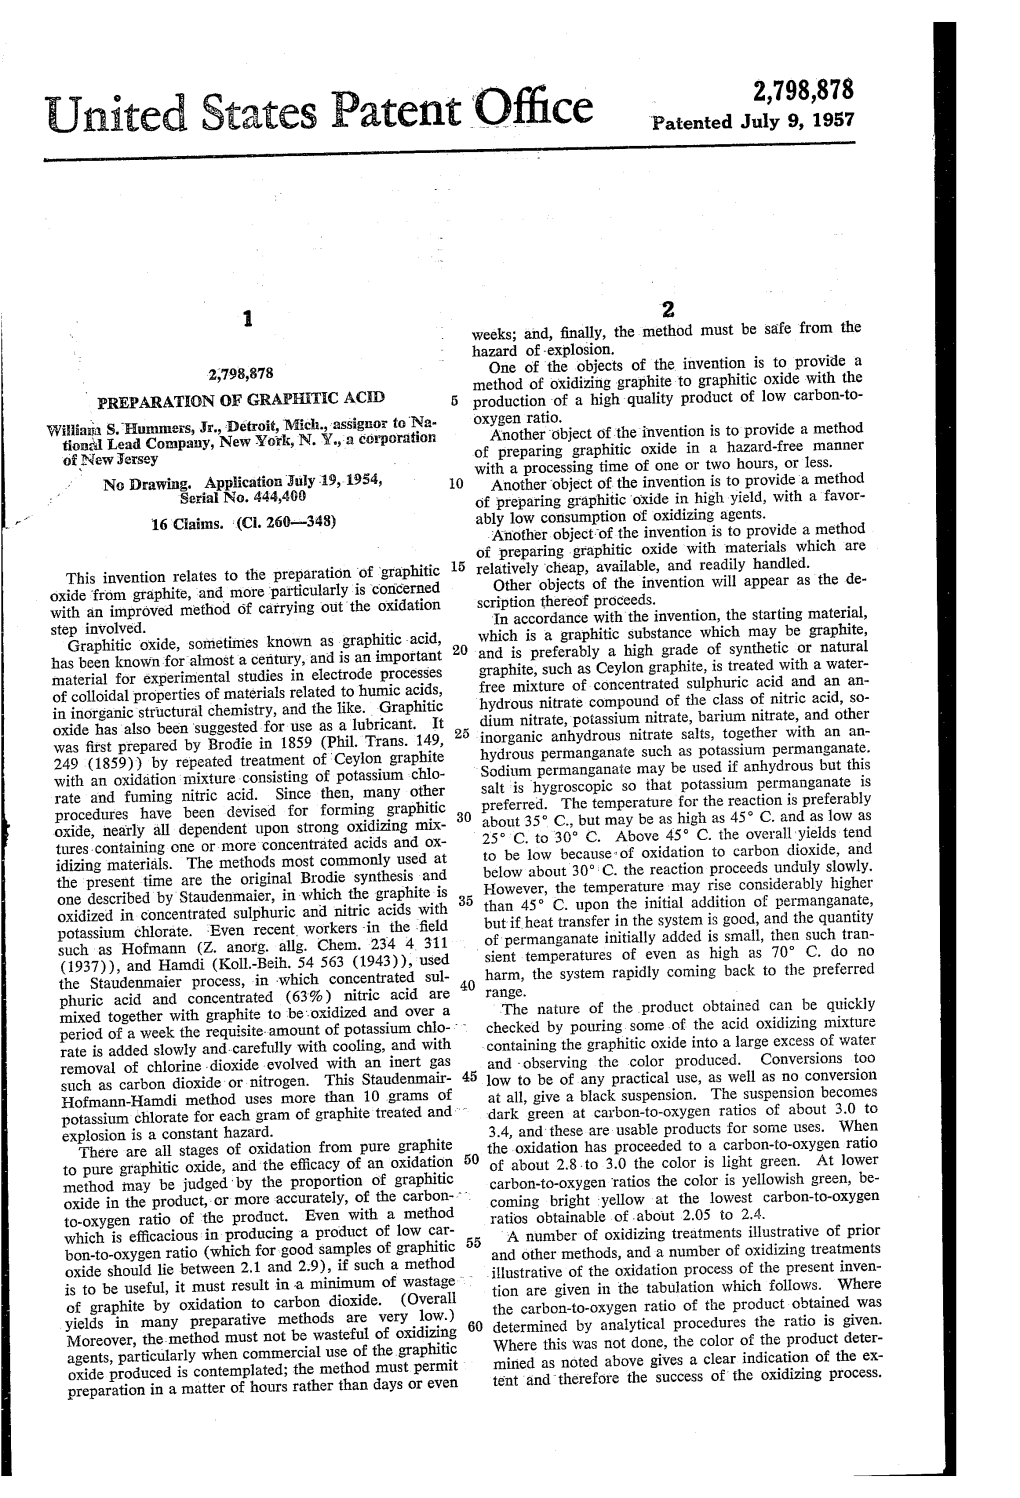 Jnited States Patent Office Patented July 9, 1957